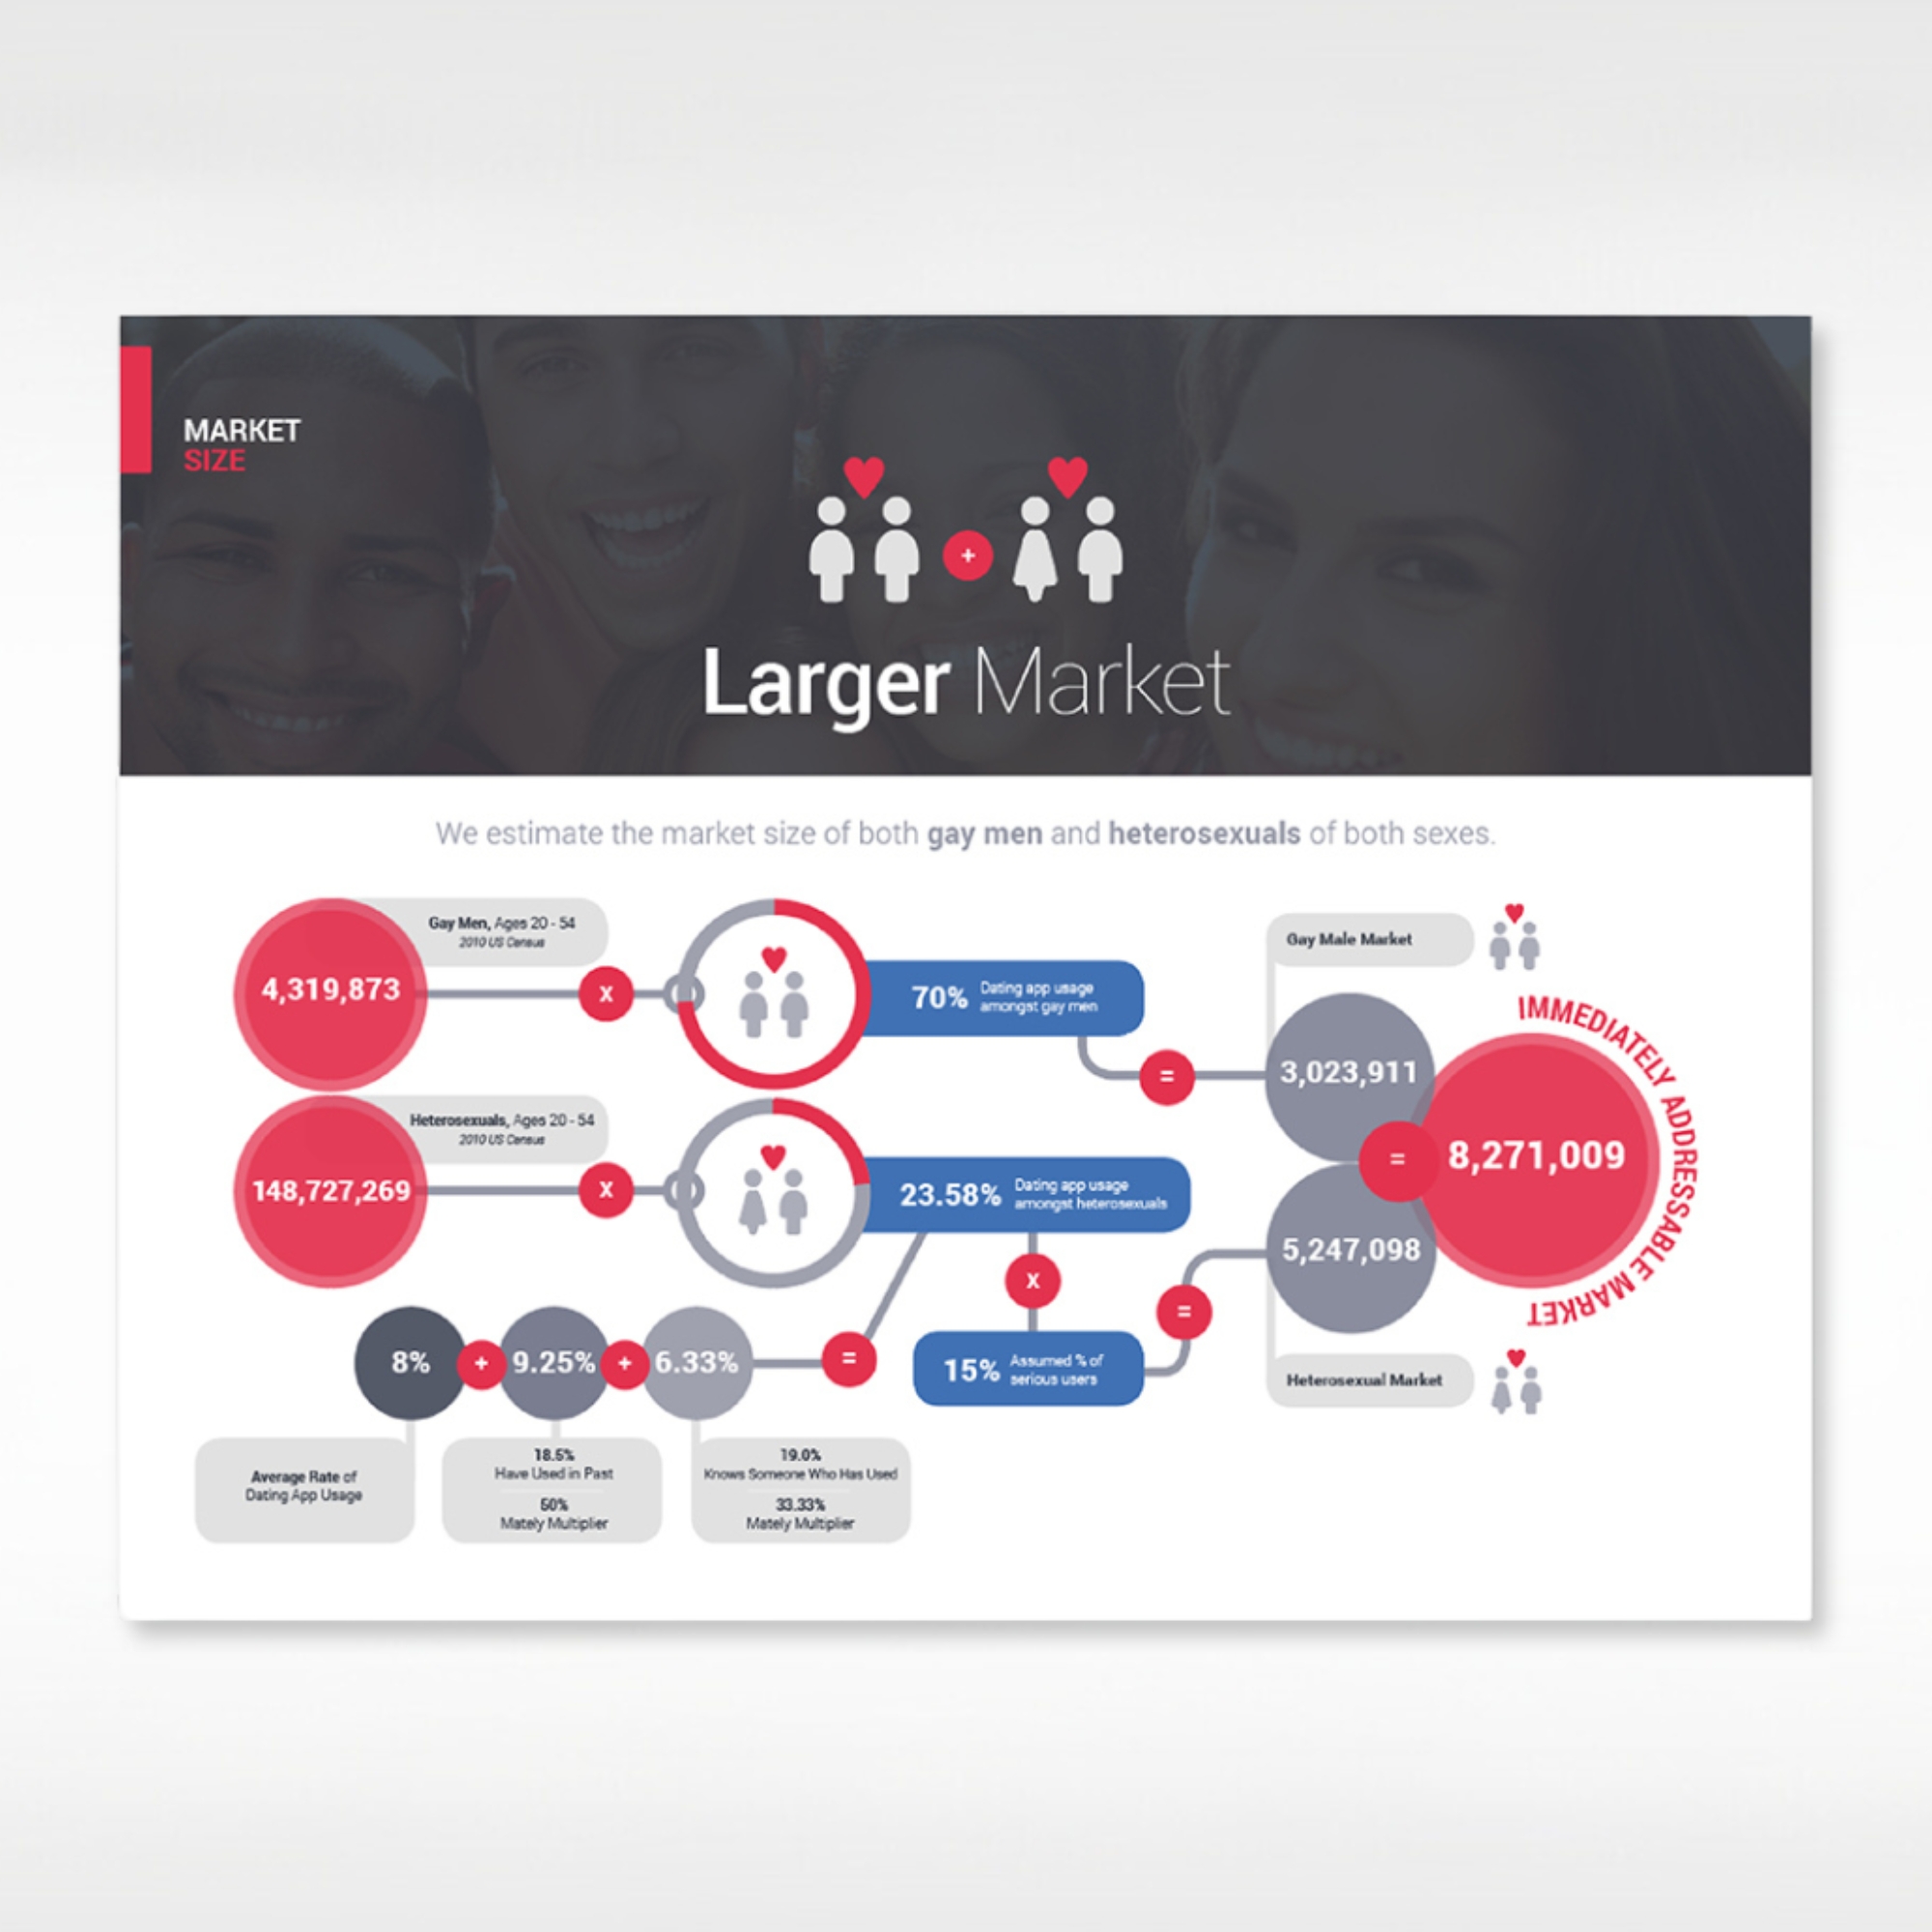 Image features a slide titled 'Larger Market' taken from the Mately Pitch Deck. The slide contains a vibrant infographic estimating the market size of both gay men and heterosexuals of both sexes, with colours including red, grey and blue.